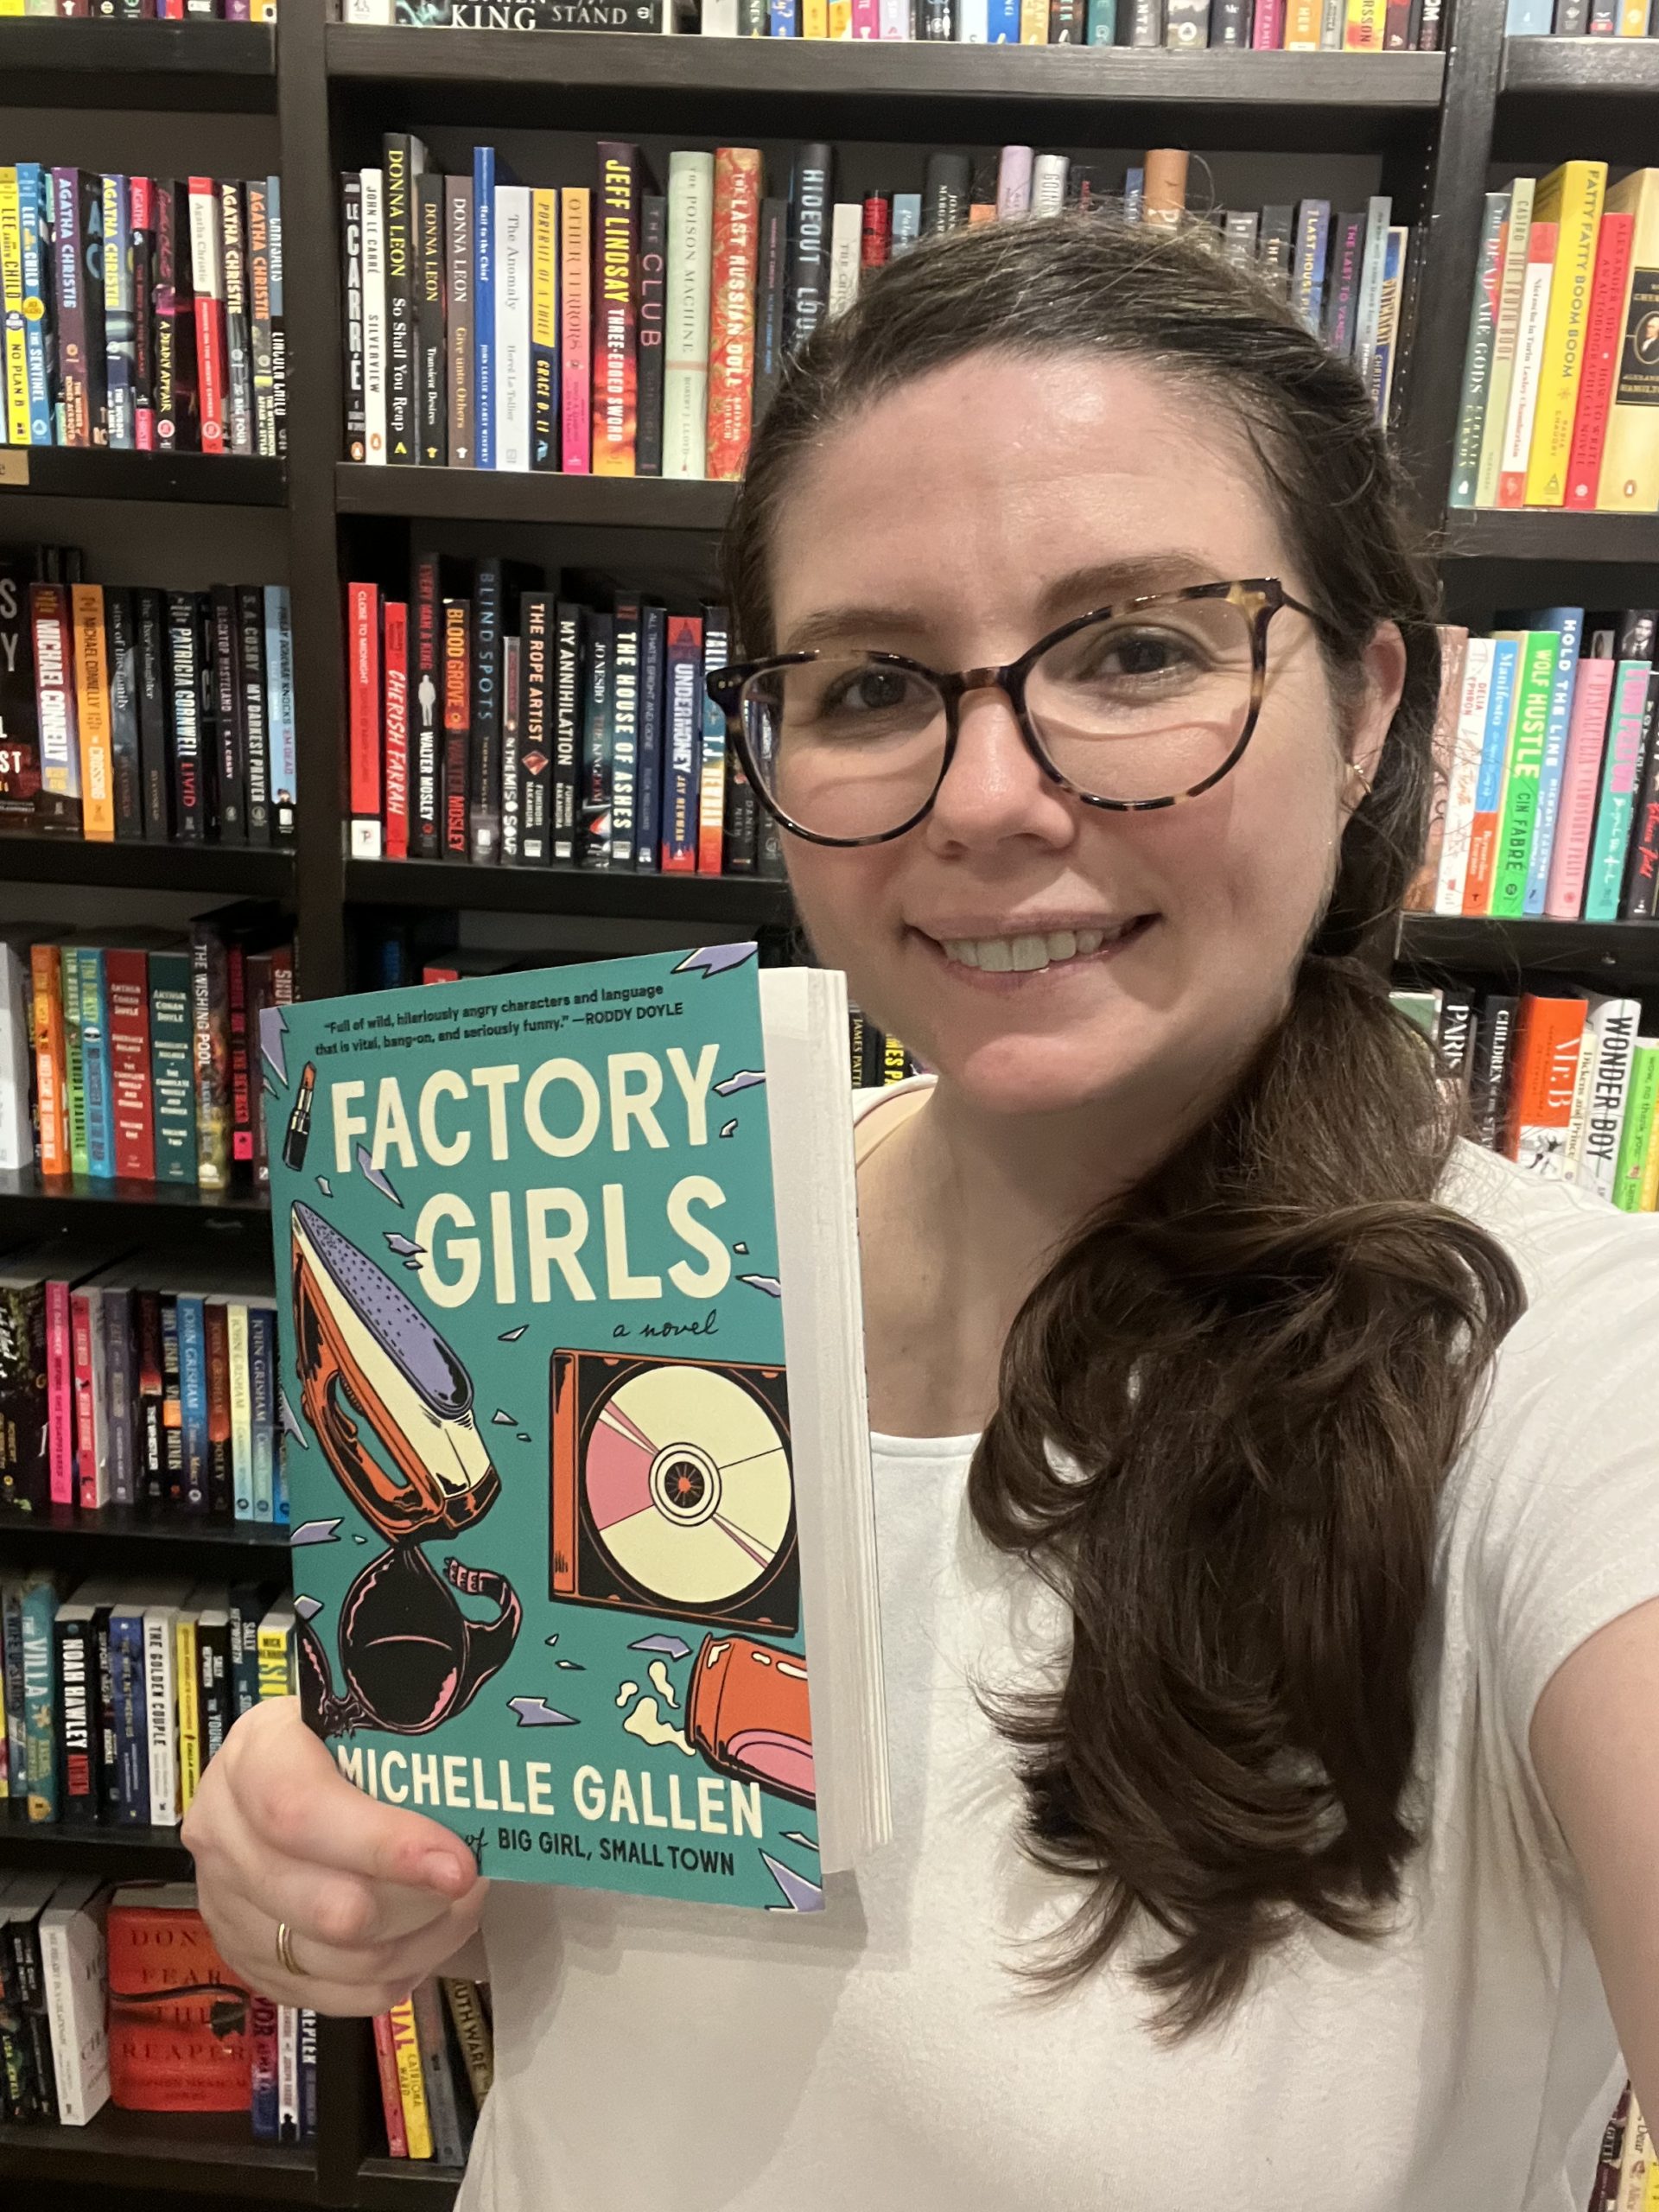 Store manager Emily holding a copy of Factory Girls by Michelle Gallen